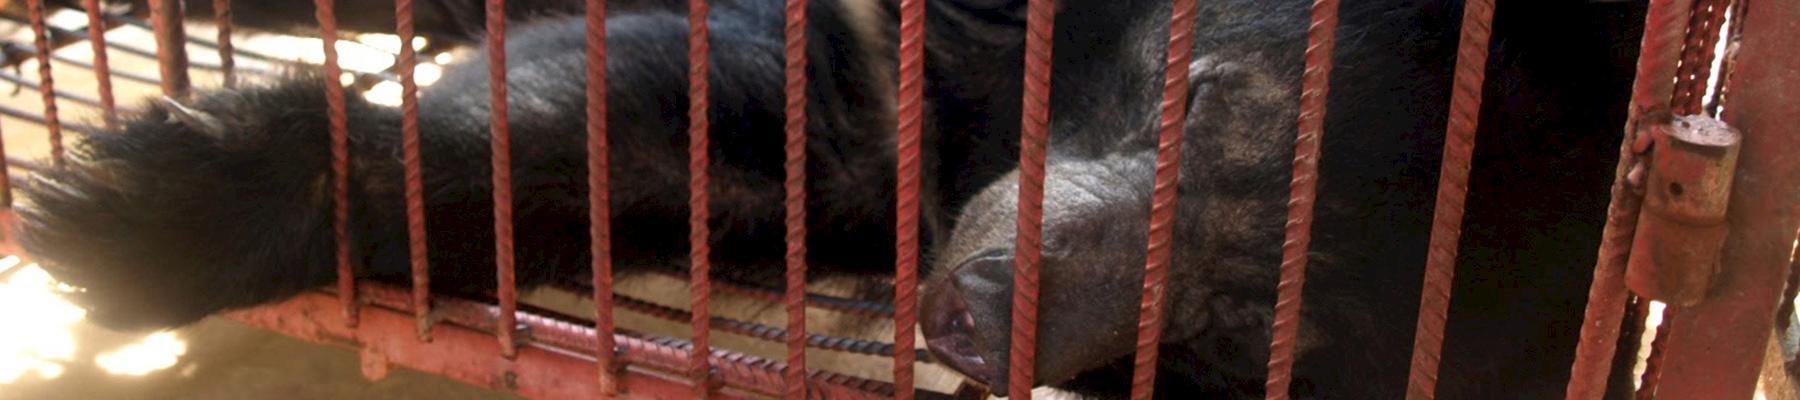 Caged bear in a Lao PDR farm, 2012 © TRAFFIC